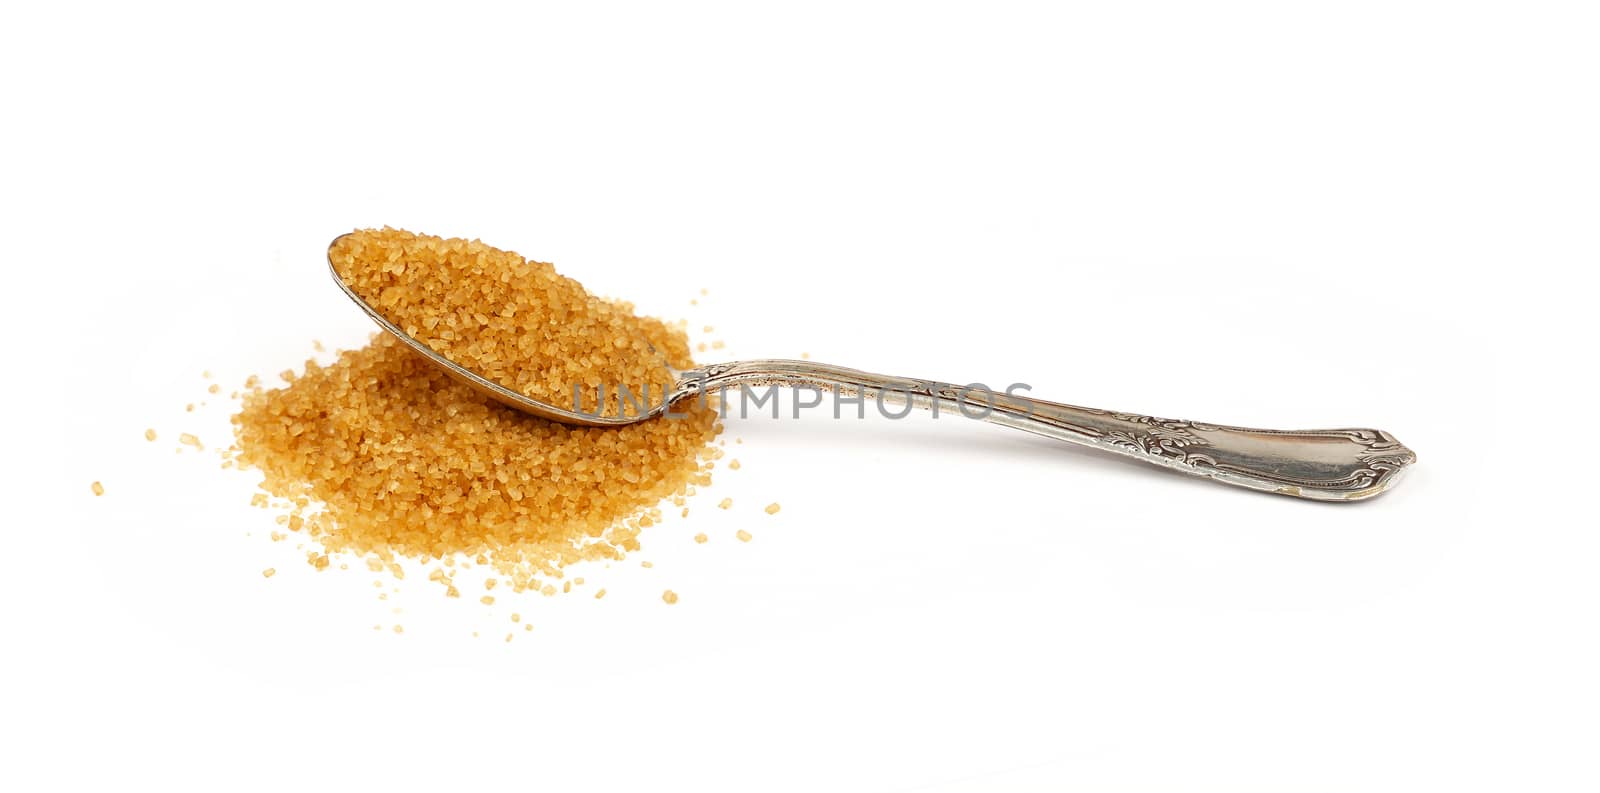 Close up one vintage silver metal spoon full of raw brown cane sugar with pinch spilled and spread around, isolated on white background, low angle side view